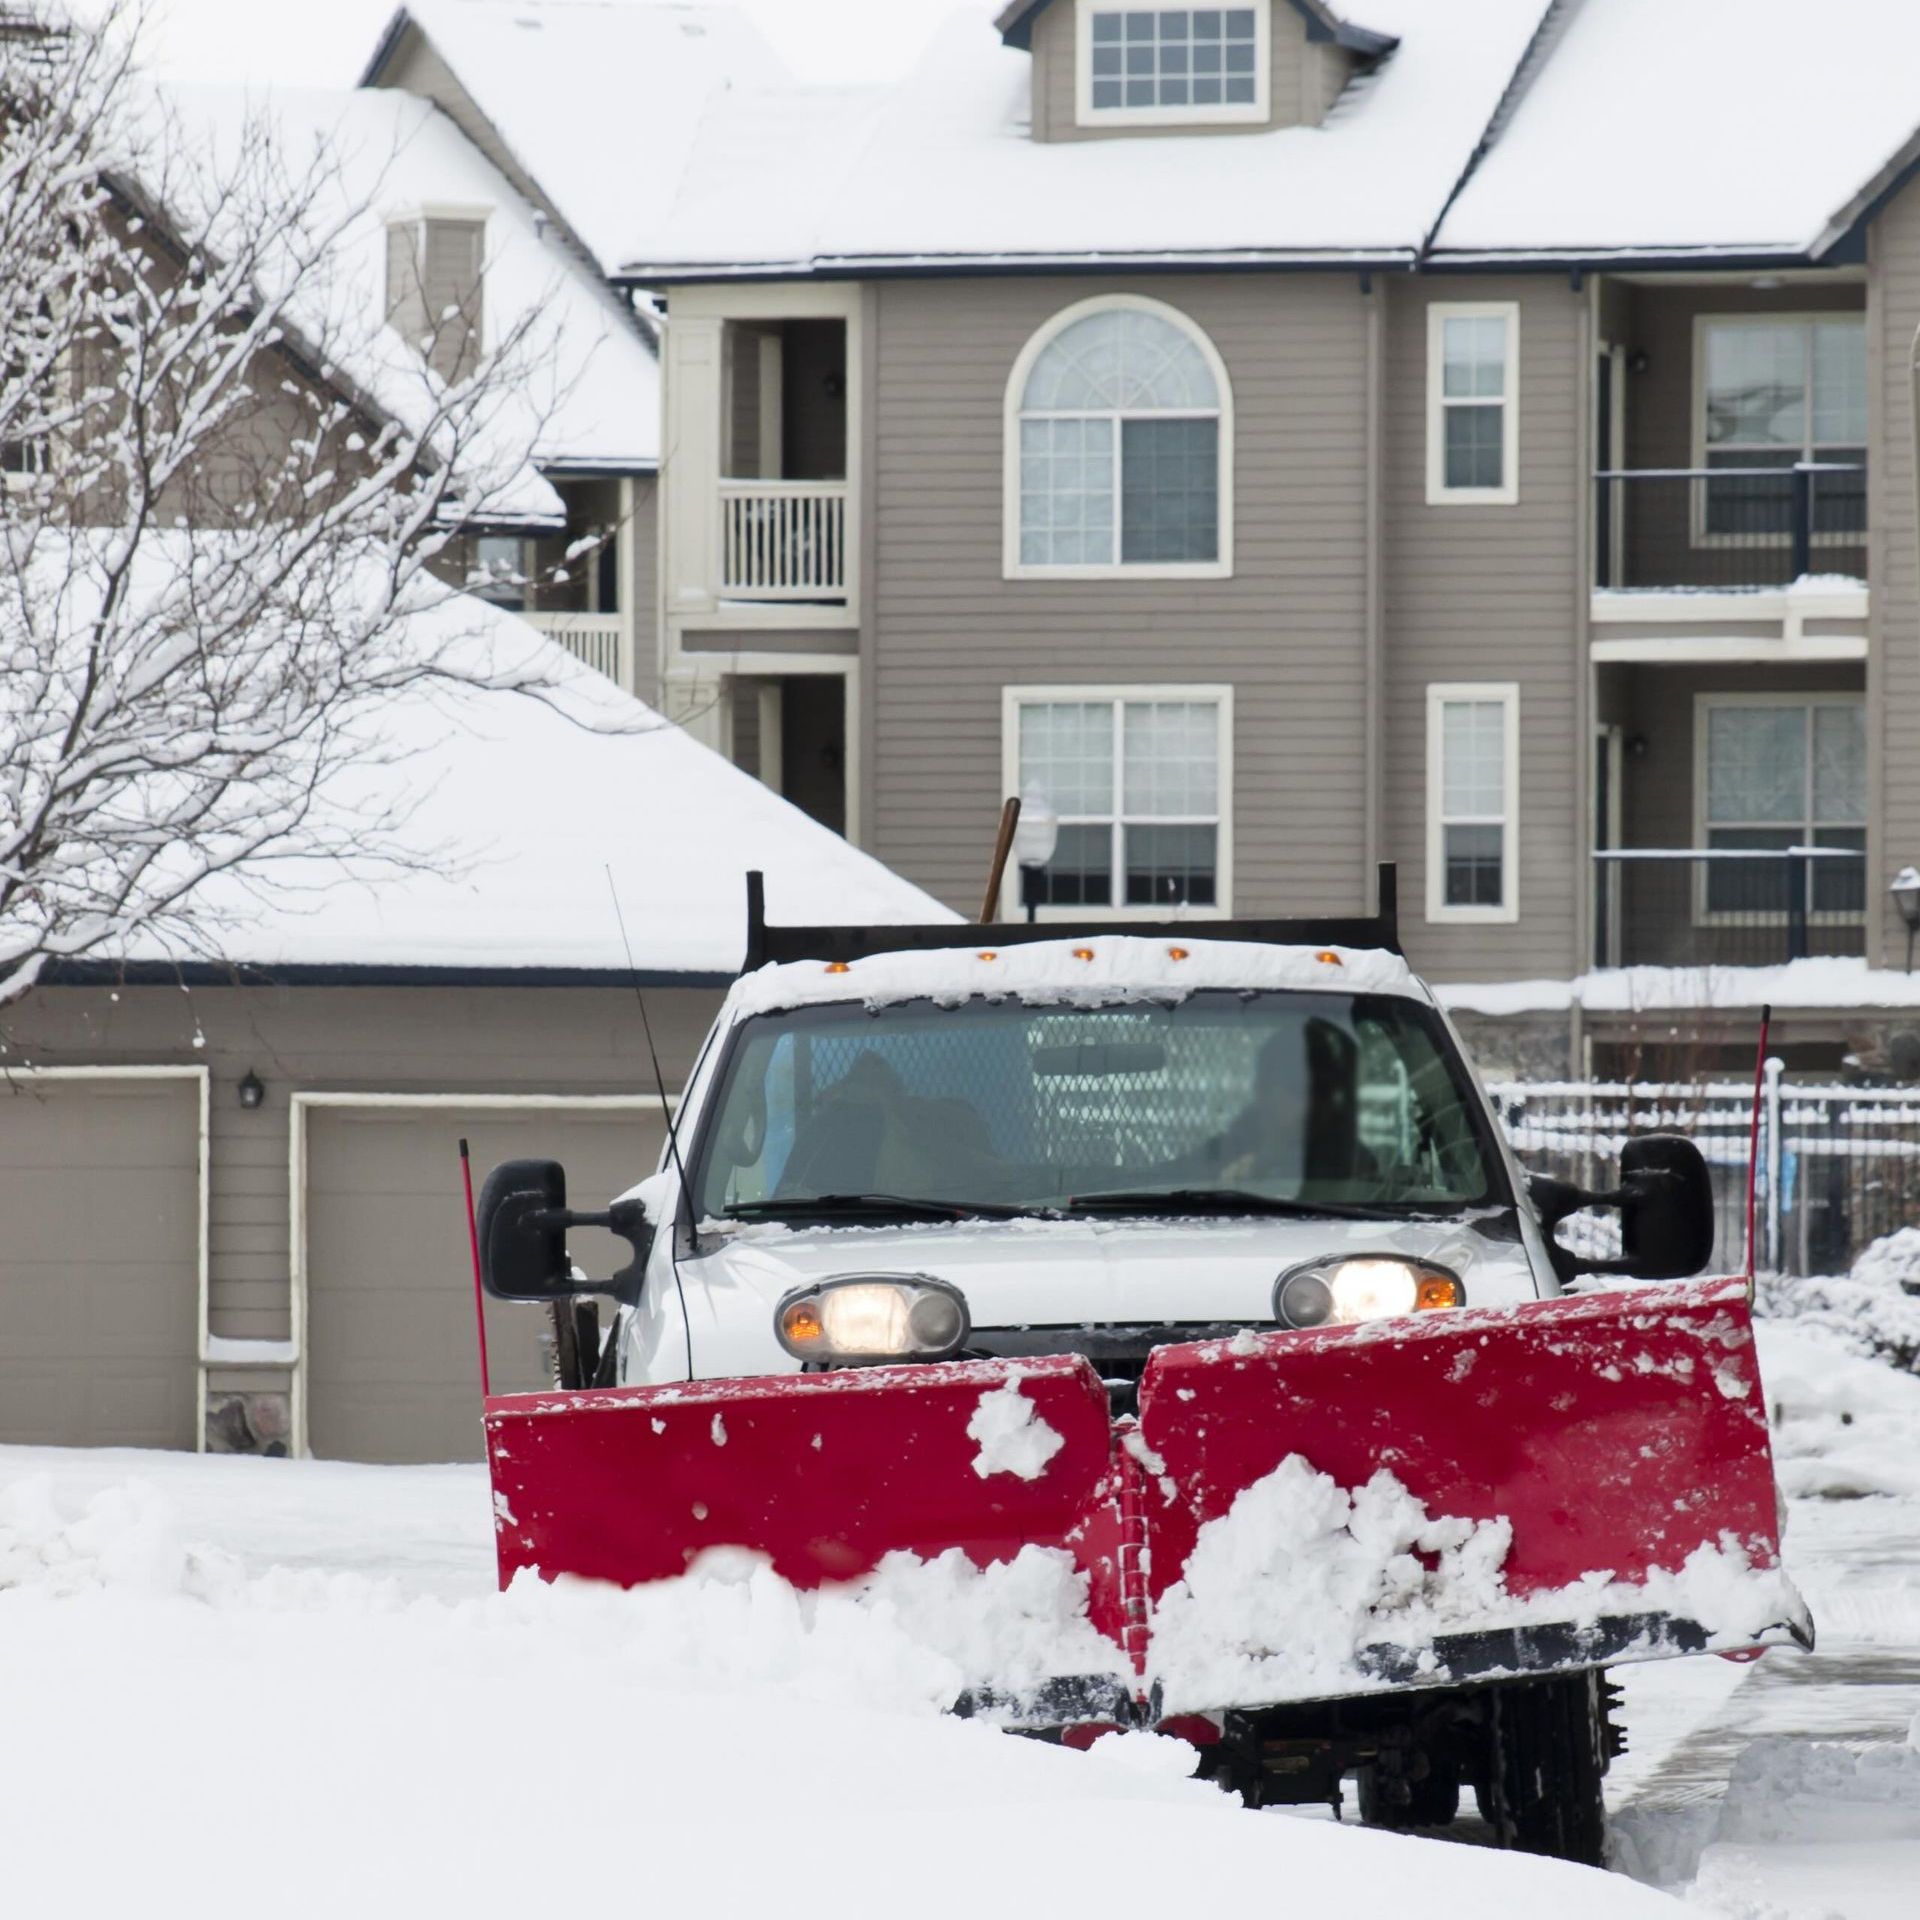 a snow plow is clearing snow in front of a house